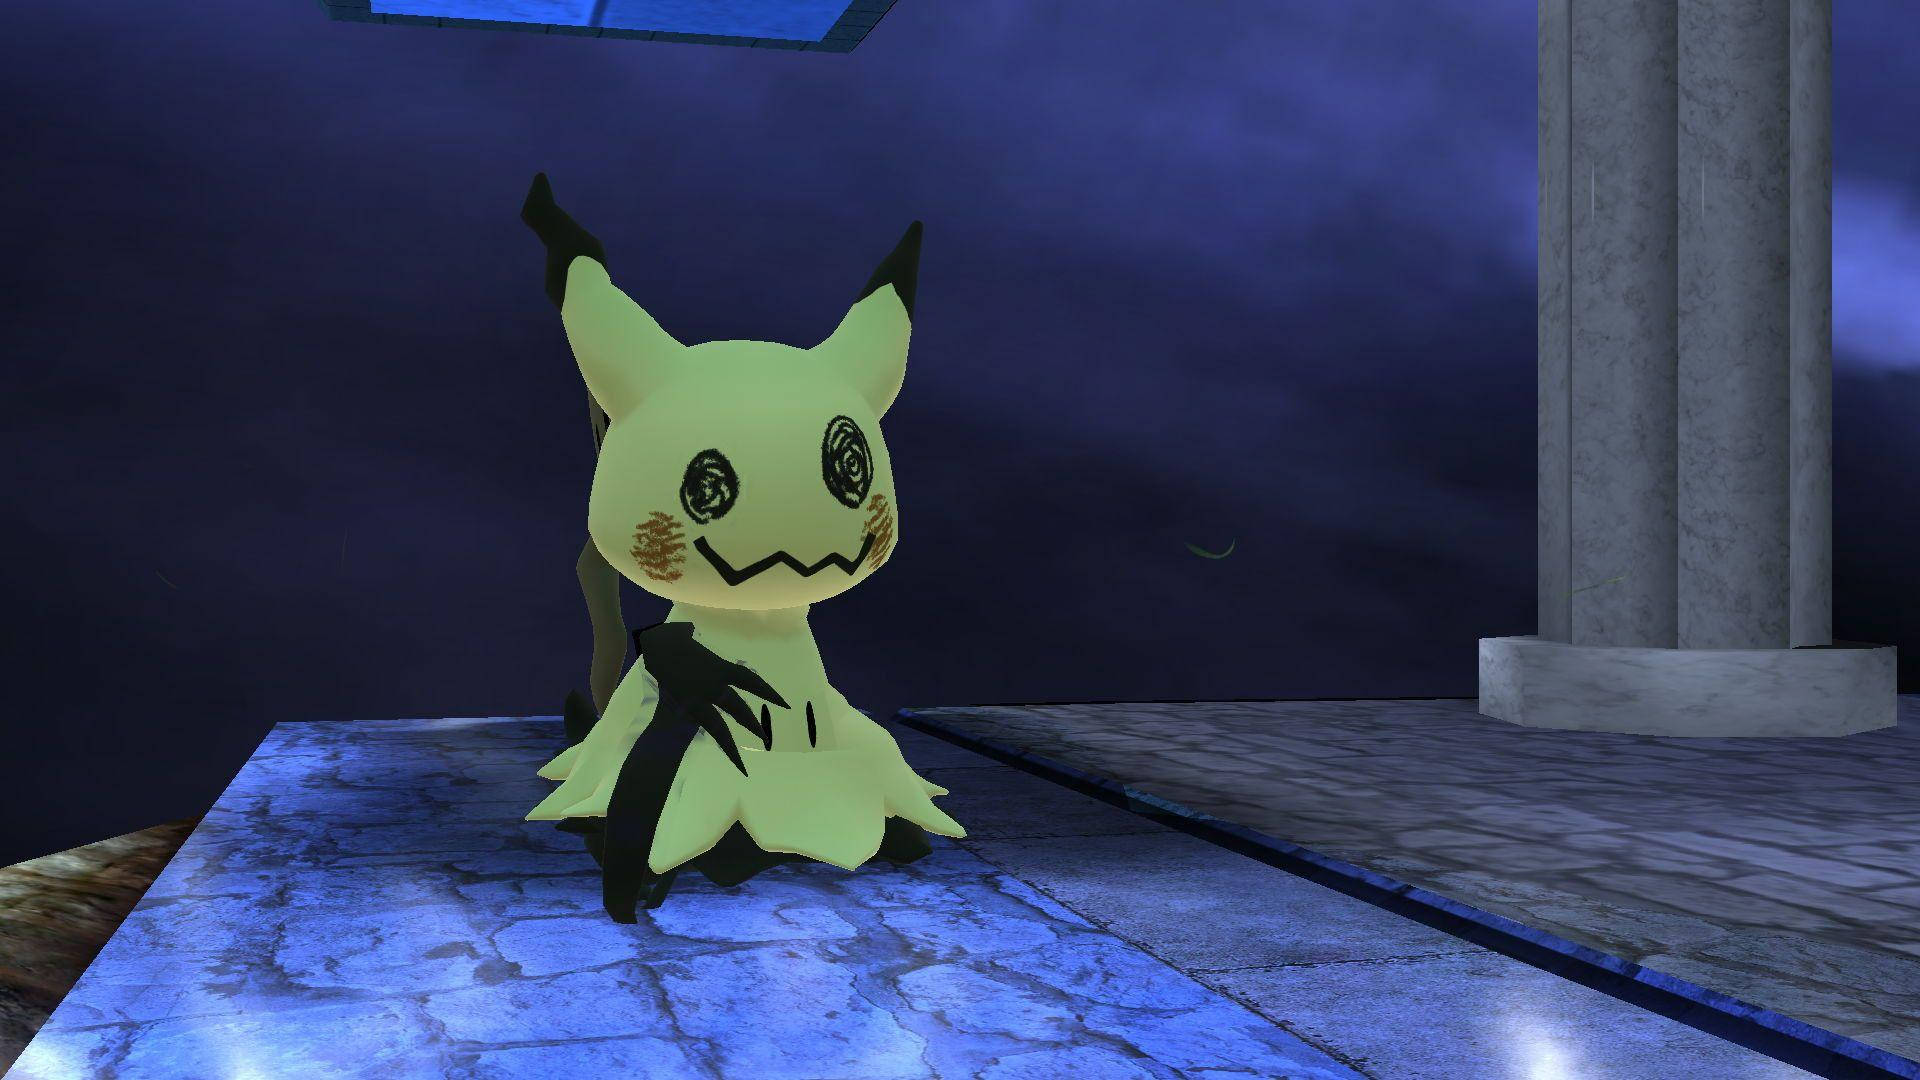 A Yellow And Black Pikachu Standing On A Stone Floor Wallpaper